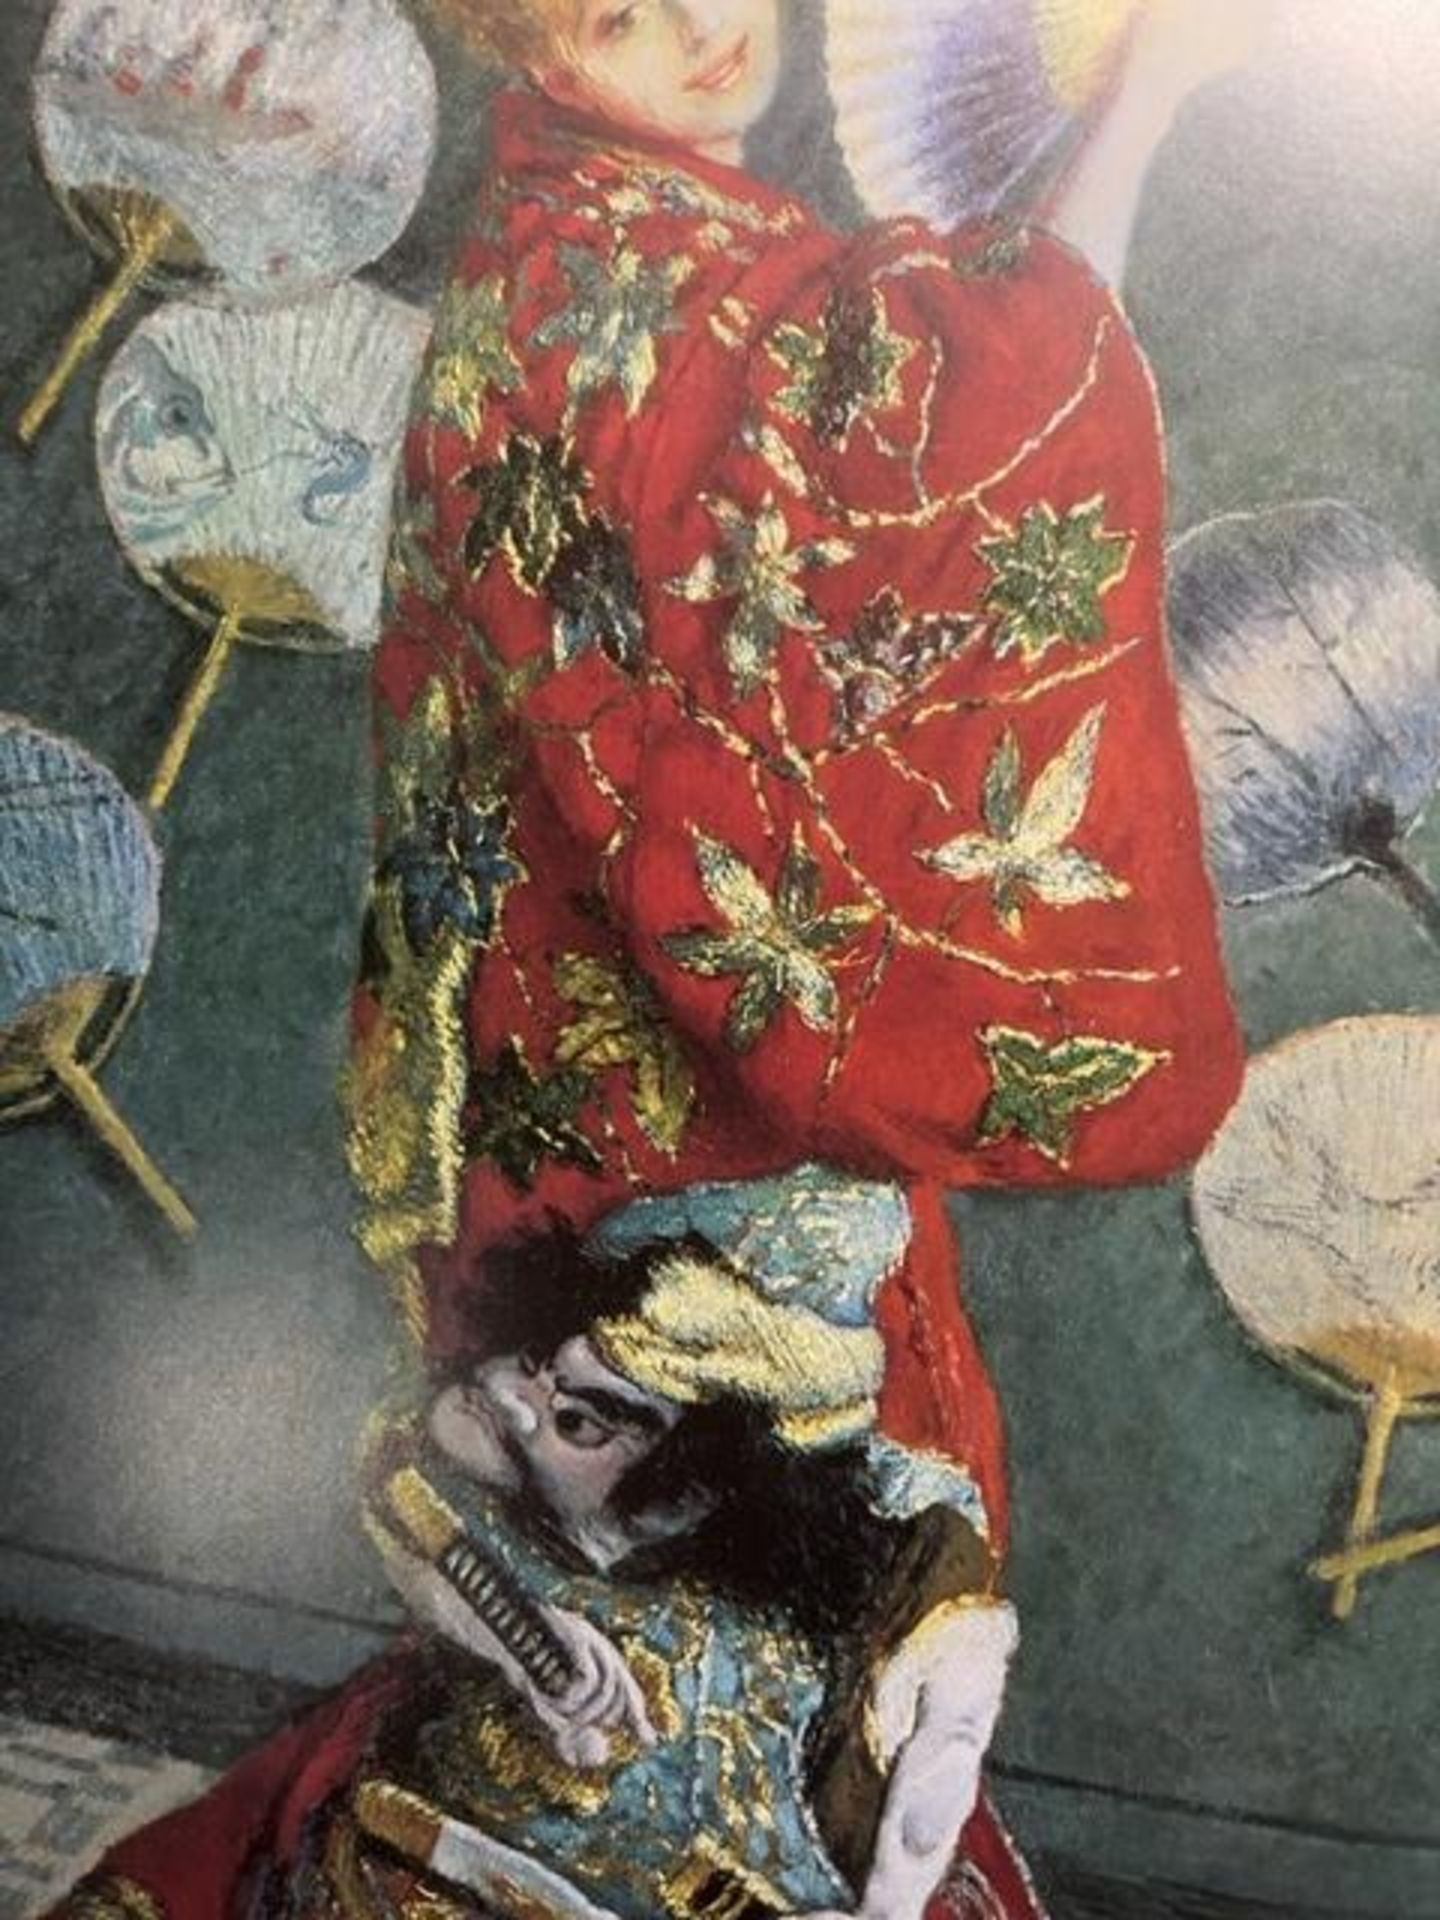 Claude Monet "Camille Monet in Japanese Costume" Print. - Image 6 of 6